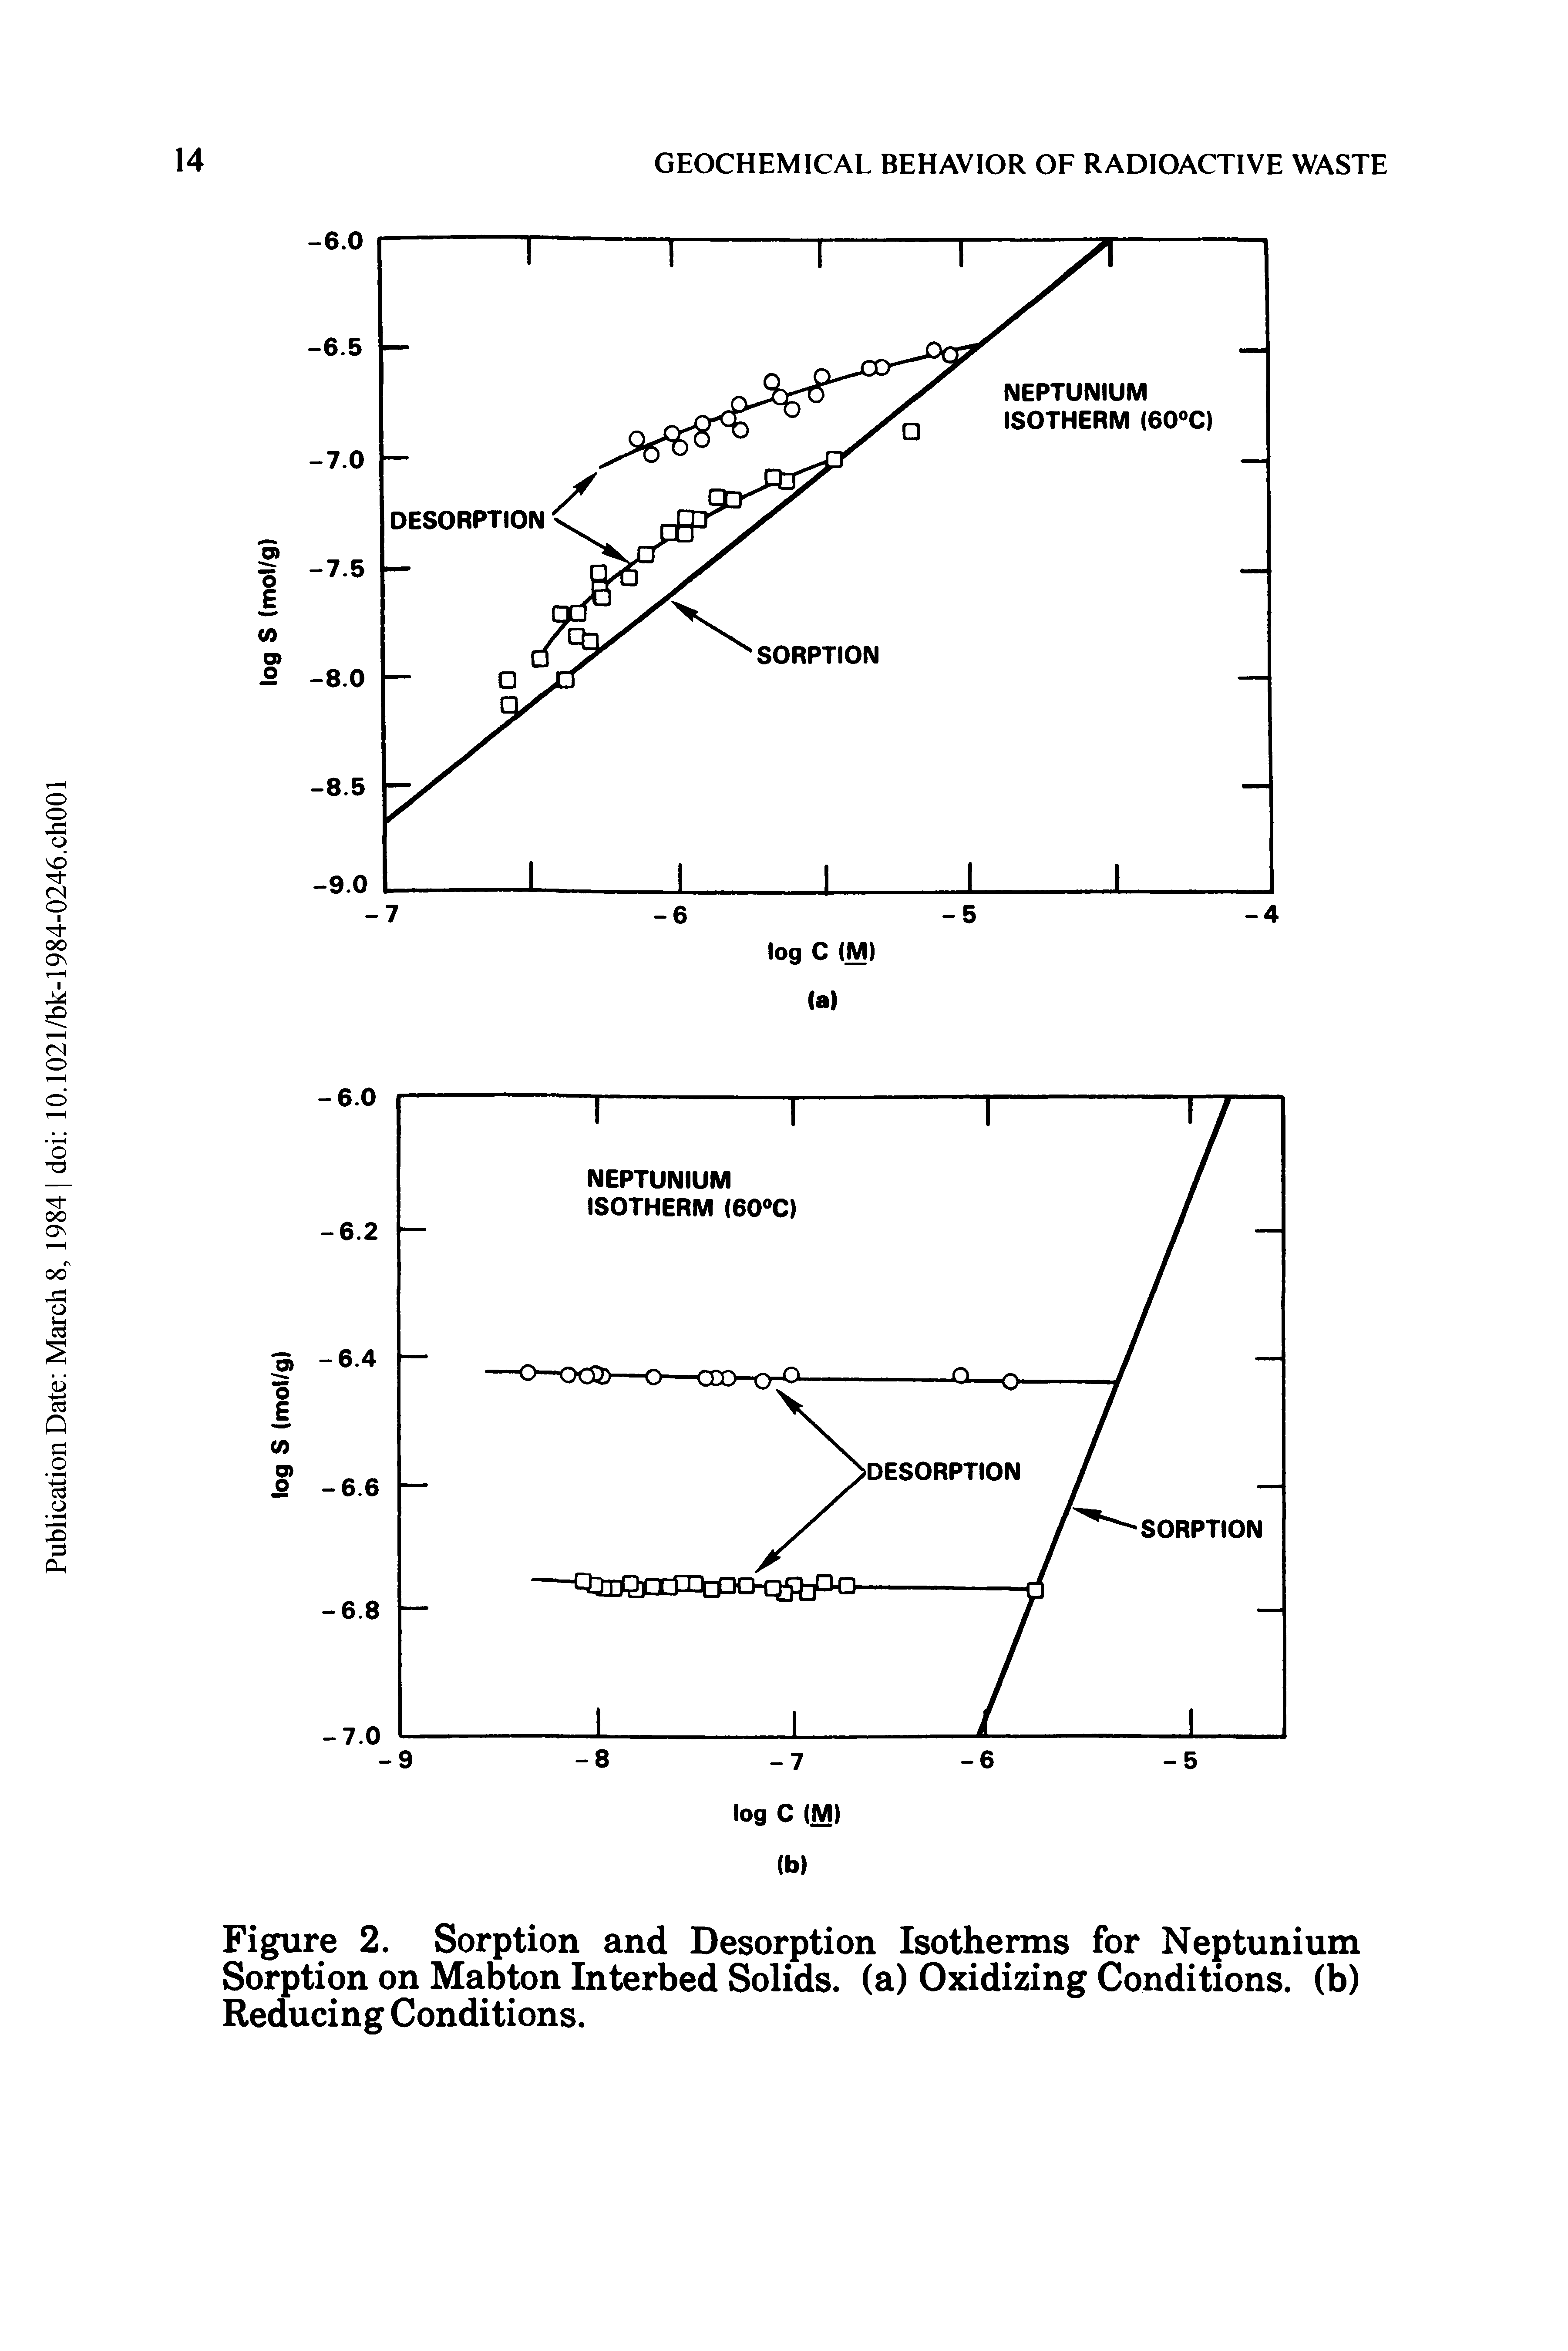 Figure 2. Sorption and Desorption Isotherms for Neptunium Sorption on Mabton Interbed Solids, (a) Oxidizing Conditions, (b) Reducing Conditions.